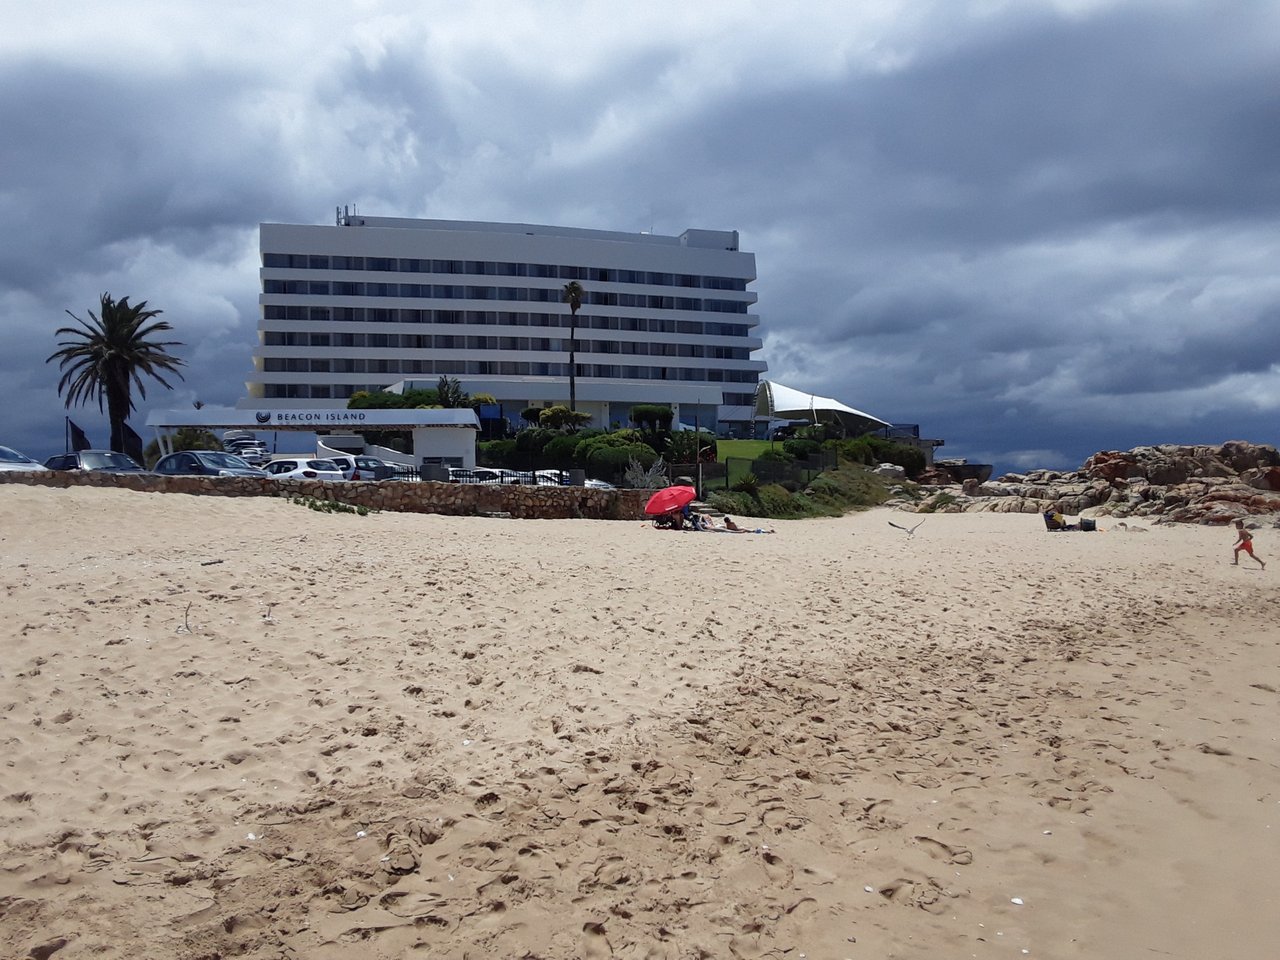 Epic beach paradise holiday location here on the Garden Route, Plettenberg Bay